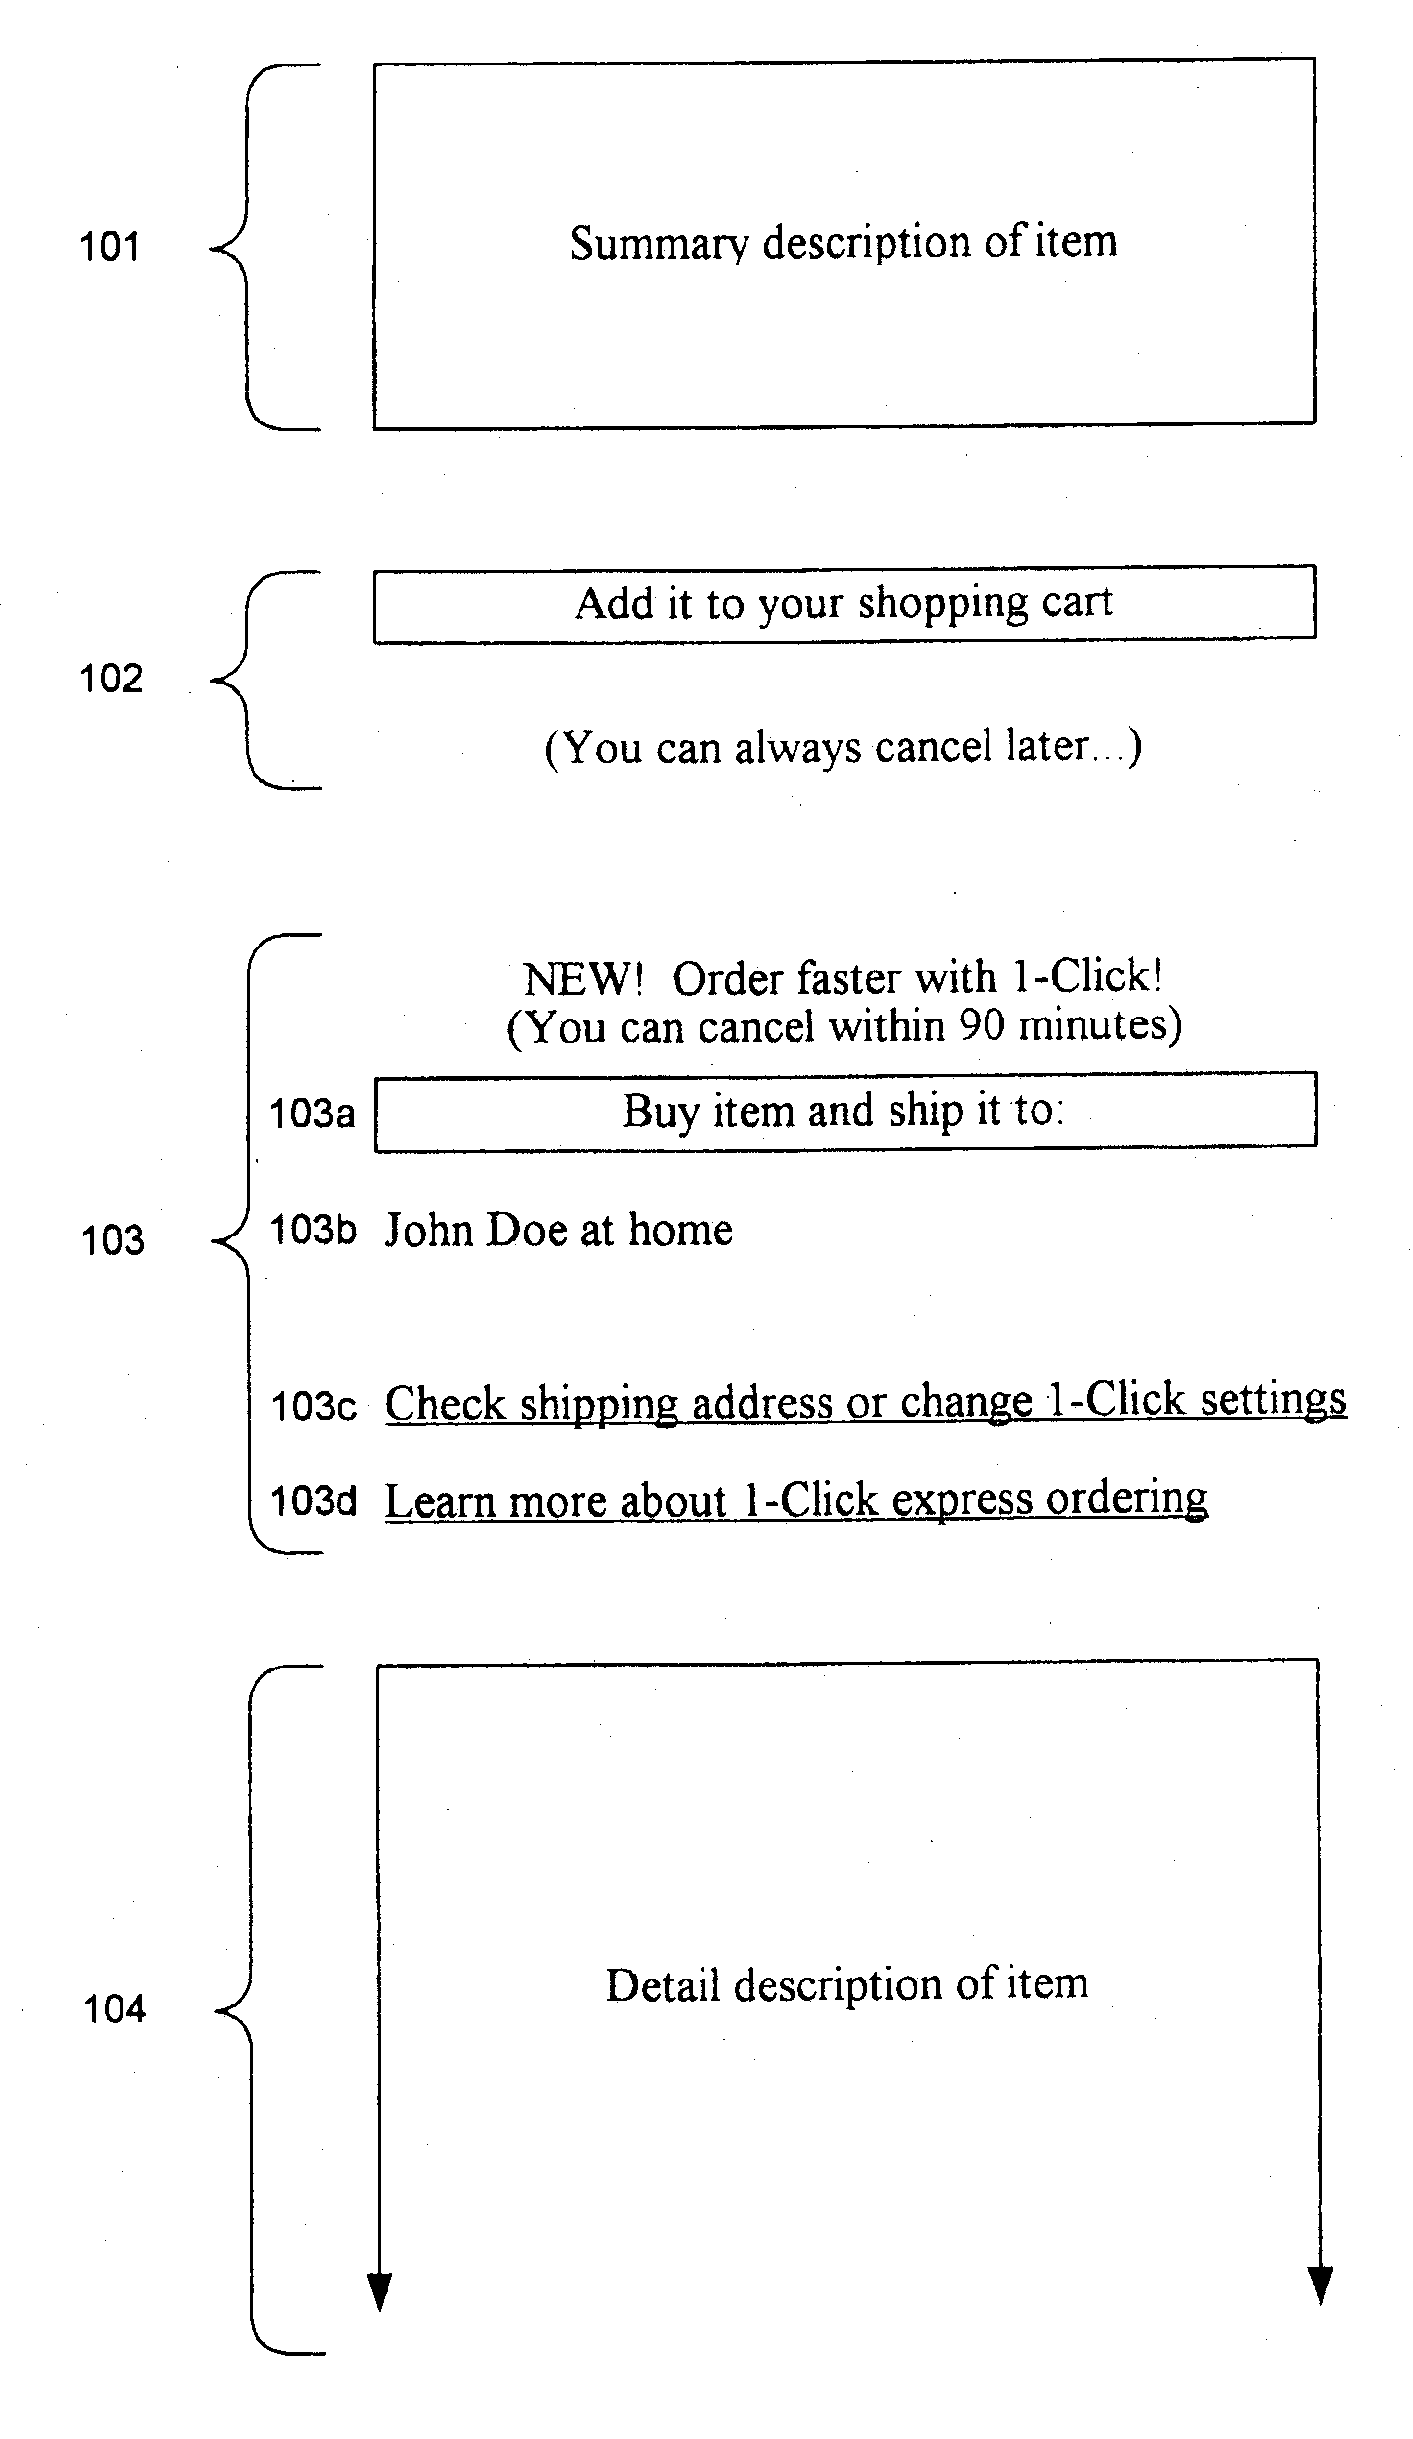 Method and system for placing a purchase order via a communications network